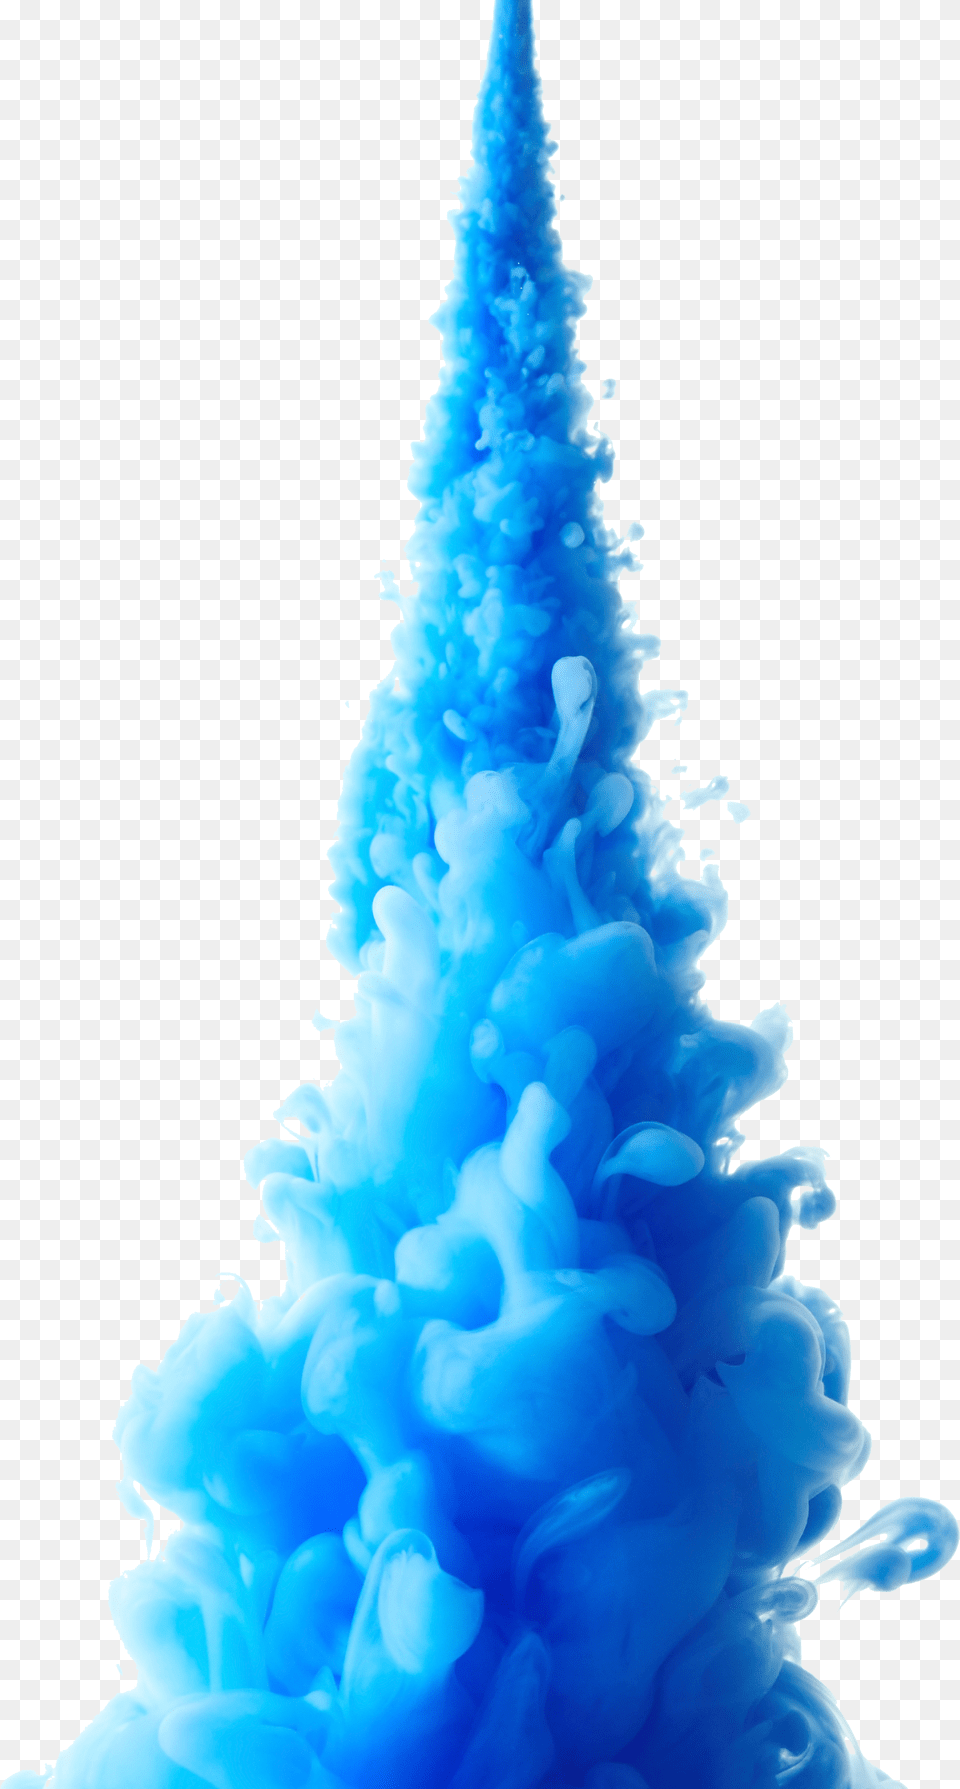 Blue Watercolor Water Color Painting Ink Image Blue Color Smoke, Ice, Turquoise, Outdoors, Nature Free Transparent Png